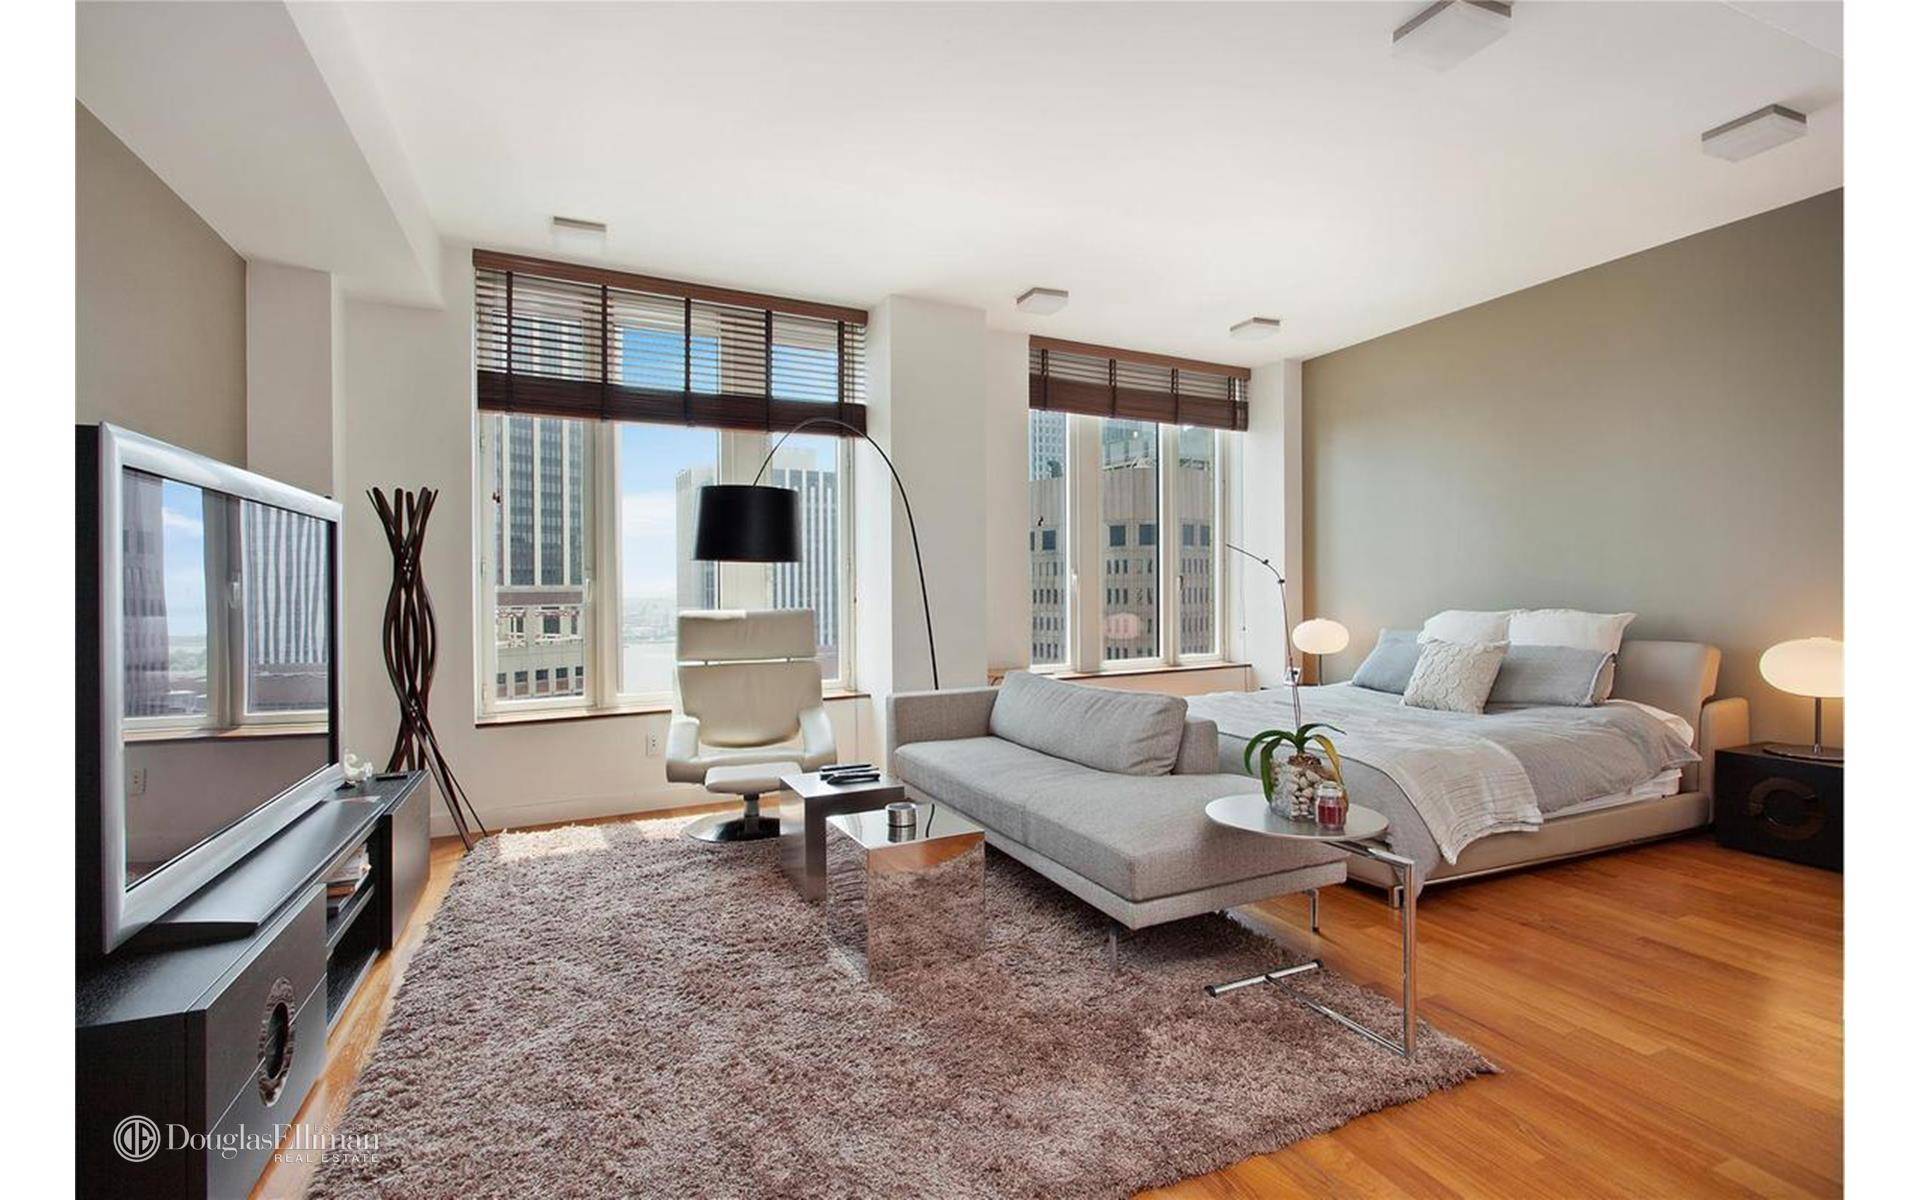 CAN BE RENTED Furnished 12, 500A state of the art 3 bedroom 3 bathroom combination unit at 15 William Street condominium.